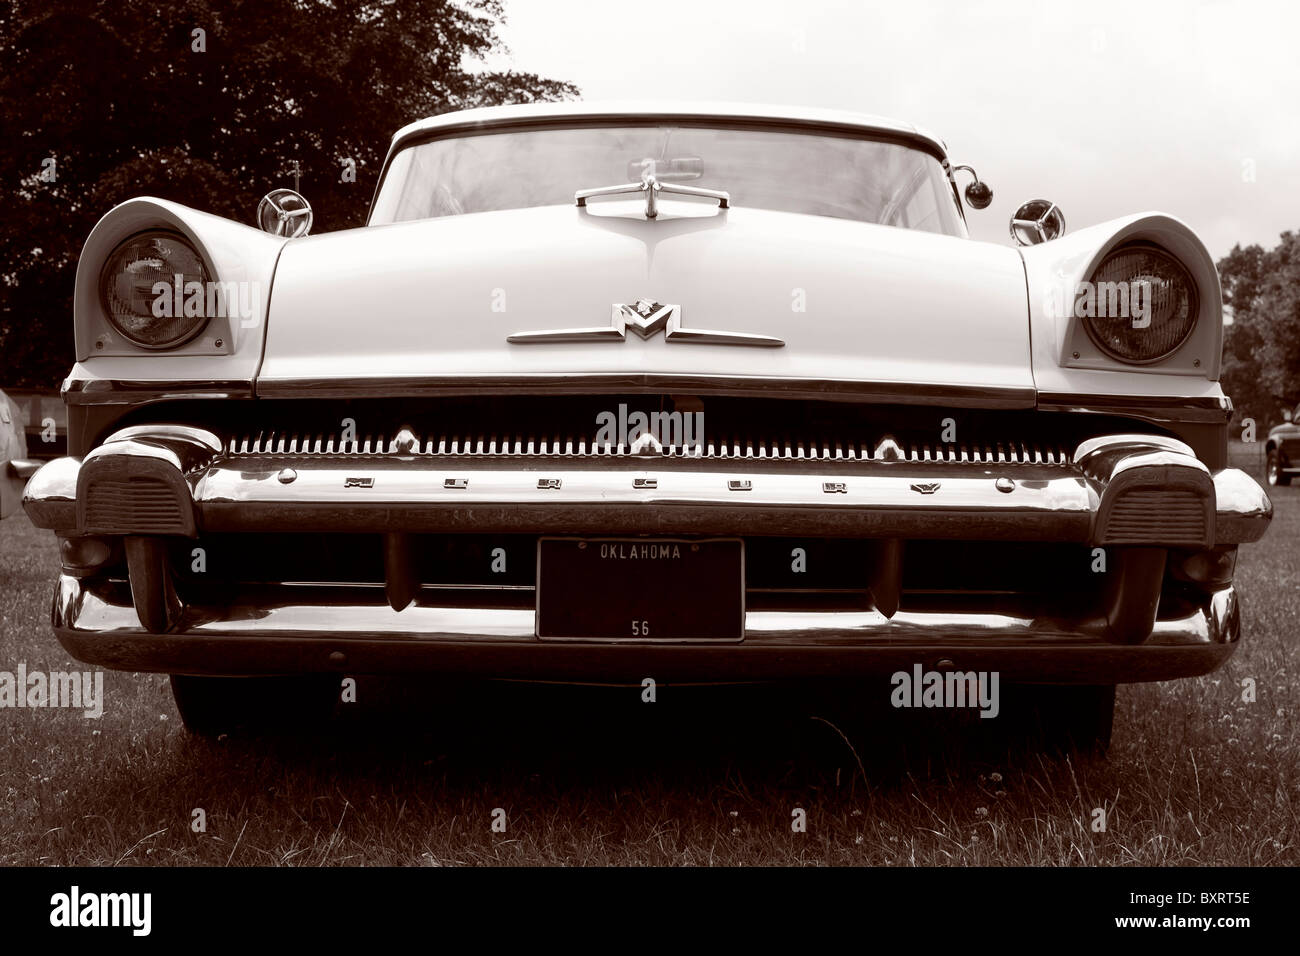 The front of a Mercury classic car at a classic car festival in the East Midlands, Nottinghamshire. Stock Photo